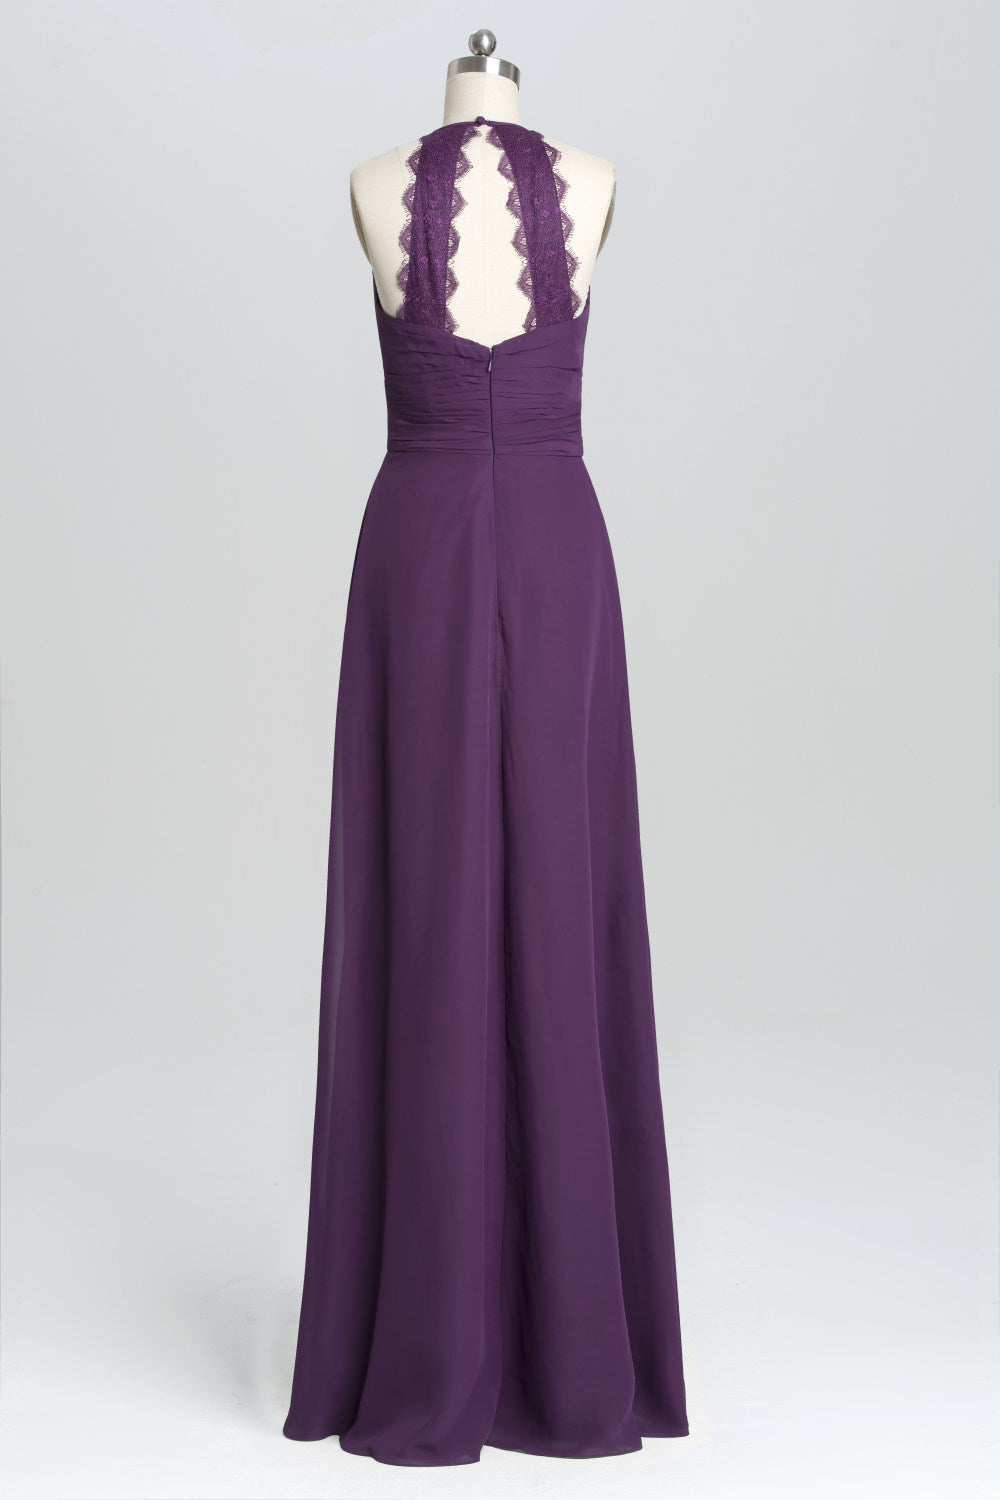 Homecoming Dresses Floral, Purple Halter A-line Pleated Long Bridesmaid Dress